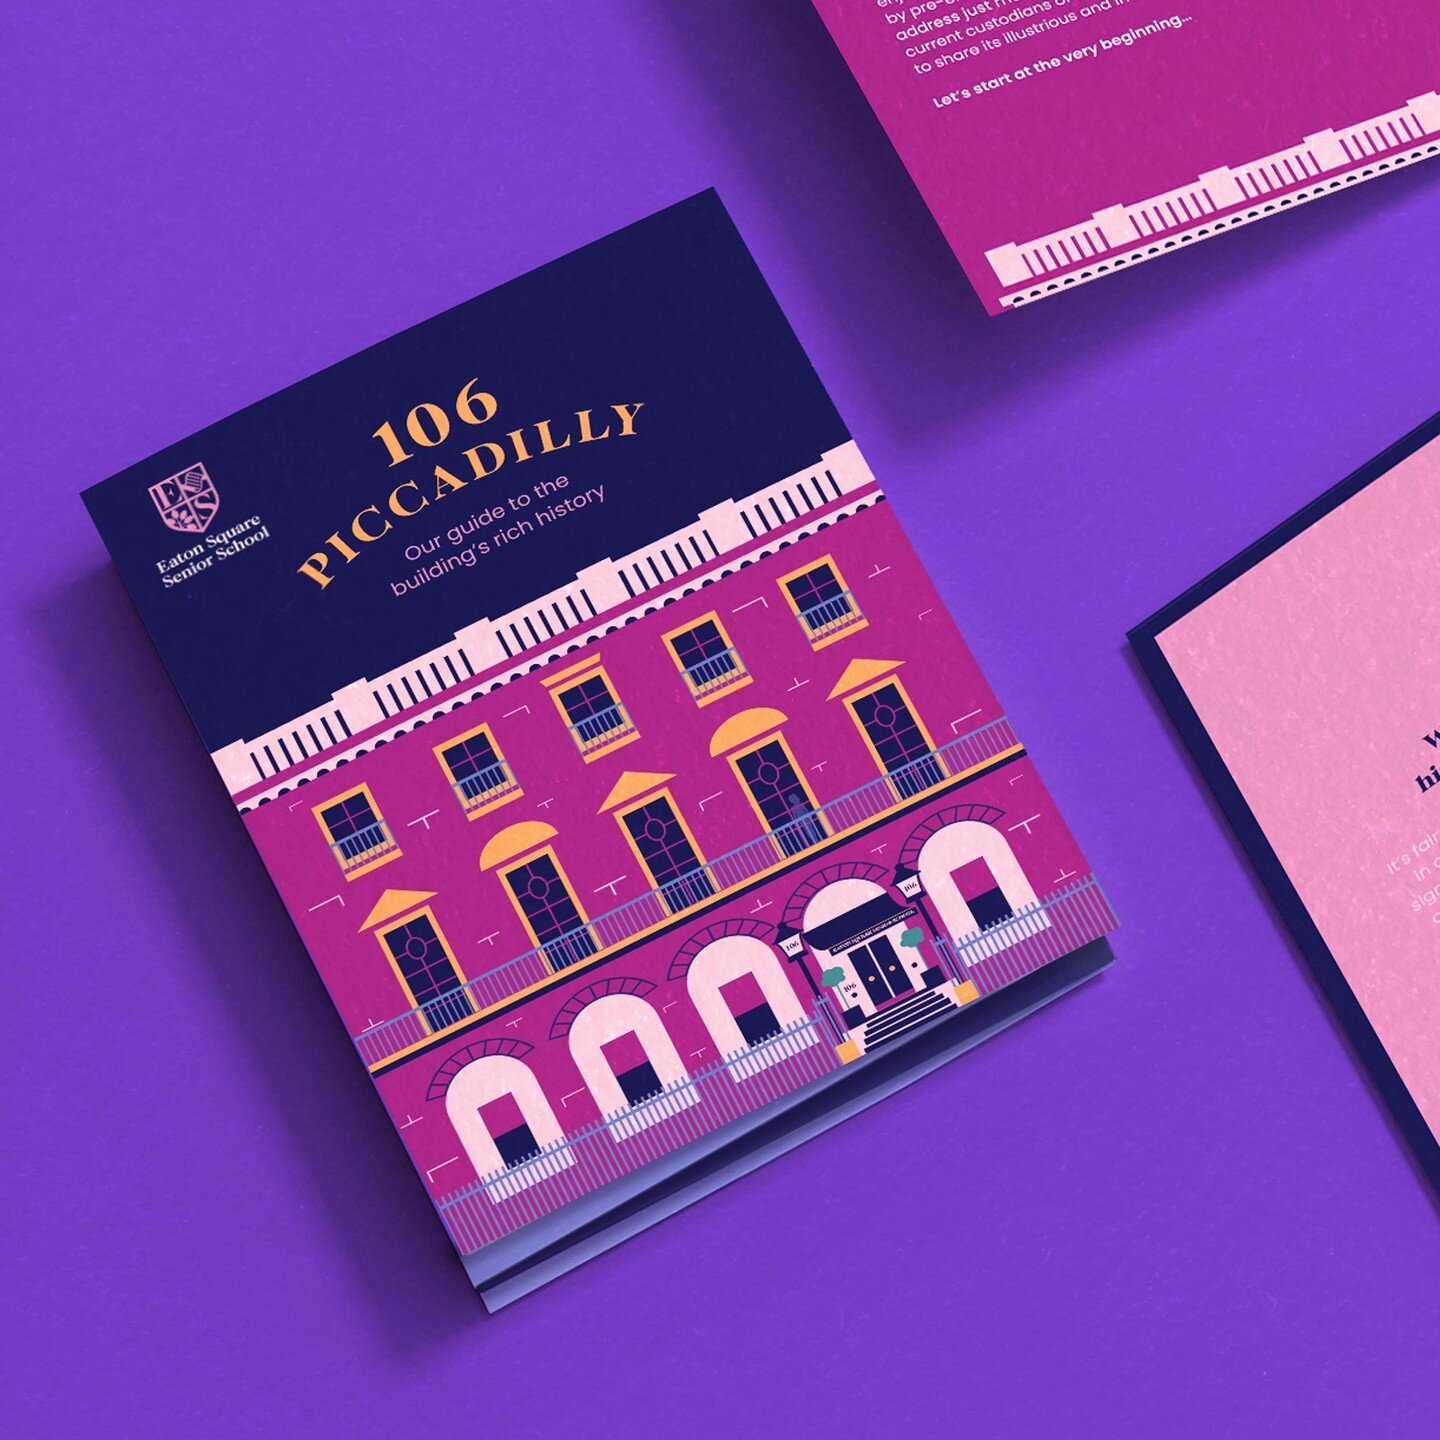 Let history unfold and step into a world where the past comes to life. This folded leaflet for 106 Piccadilly, the home of Eaton Square Senior School in London is a passport to a charming adventure that takes you on a short but spirited journey of di